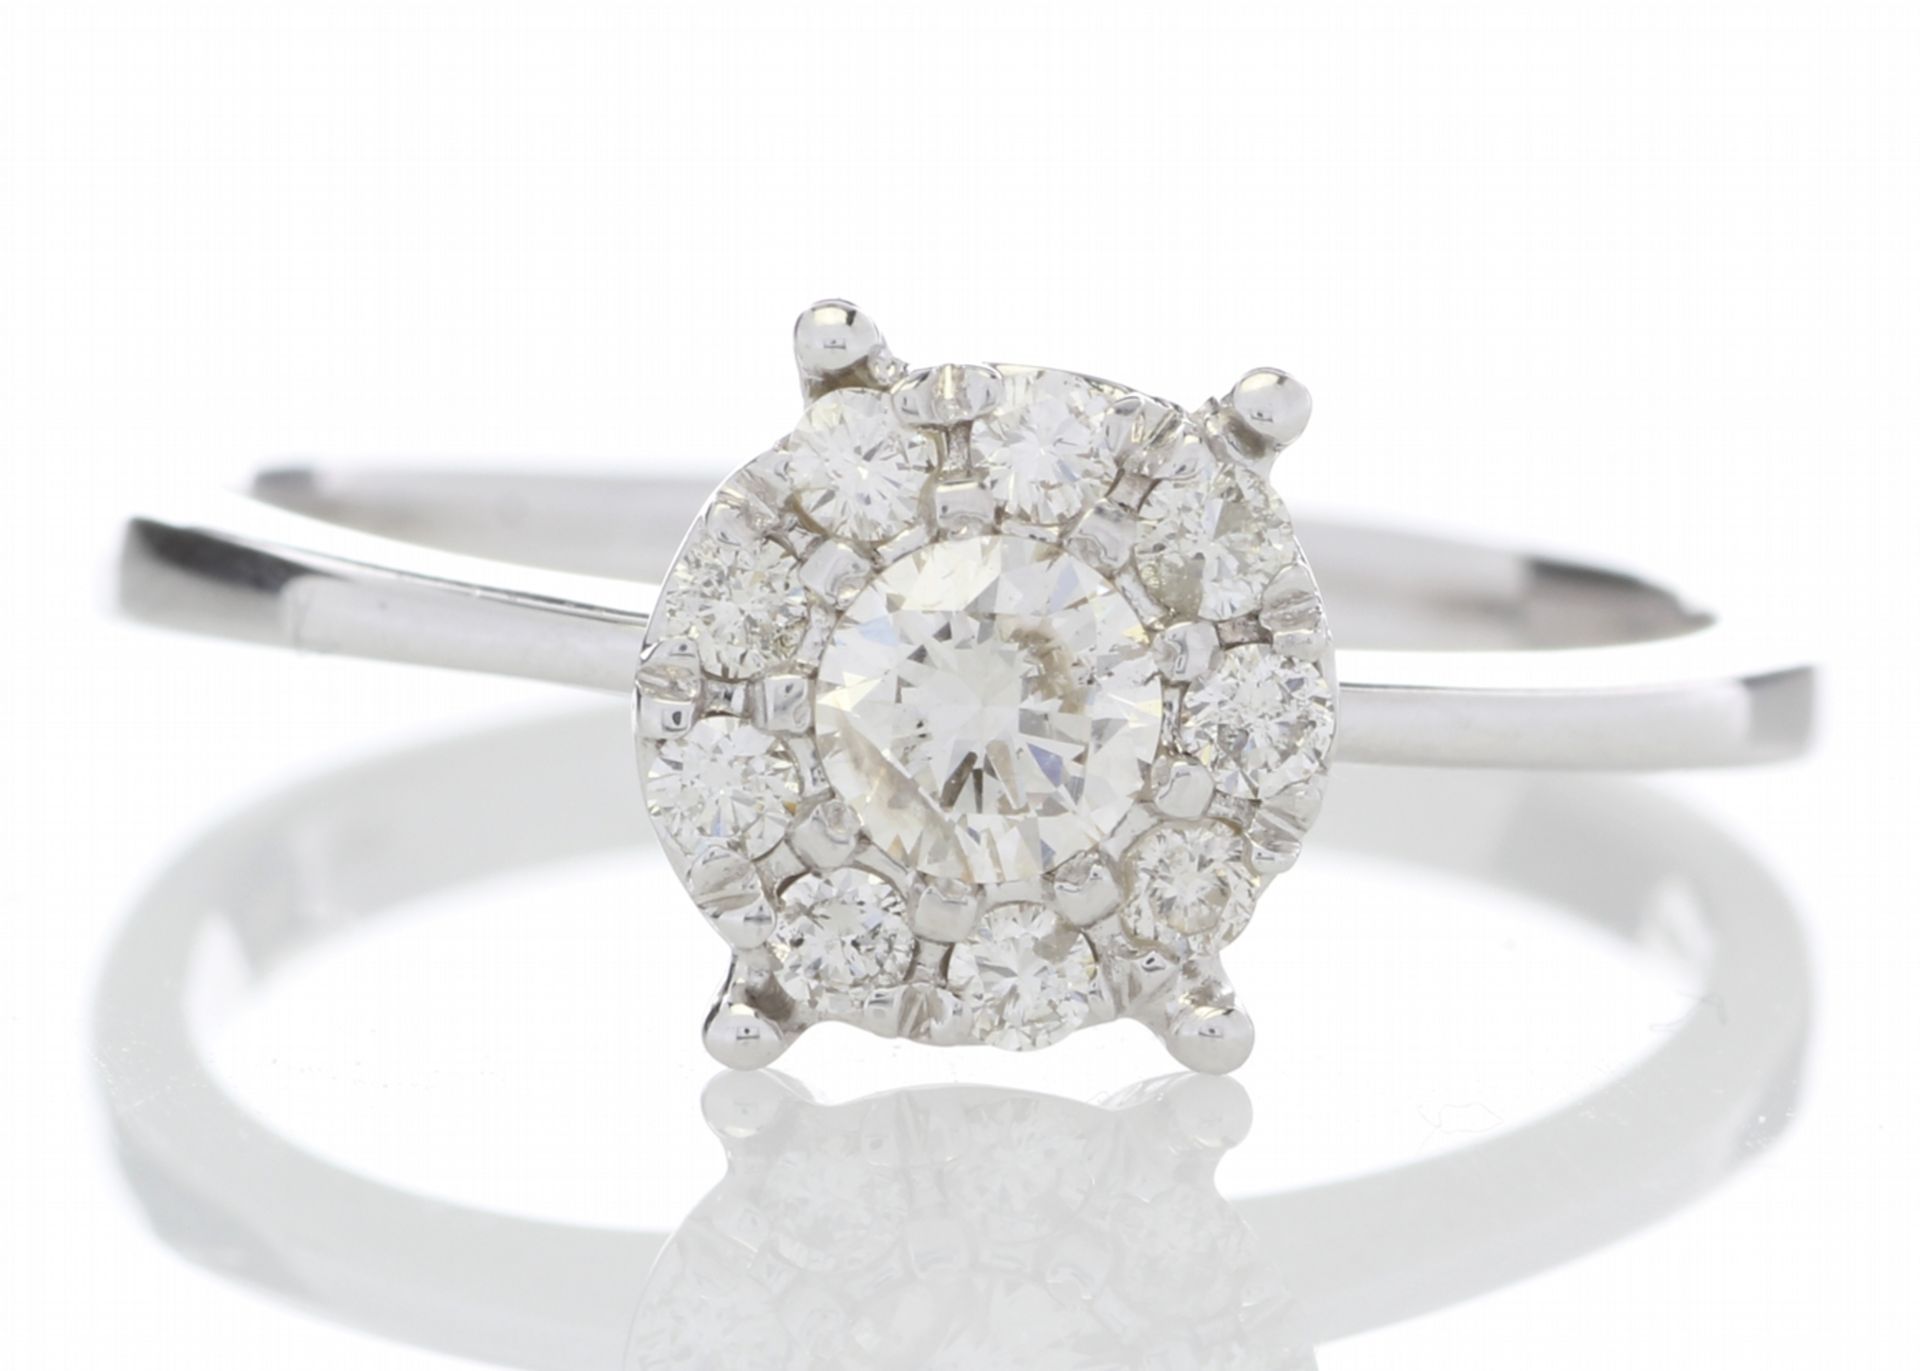 14ct Gold Flower Cluster Diamond Ring 0.50 Carats - Valued by GIE £5,995.00 - A modern classic style